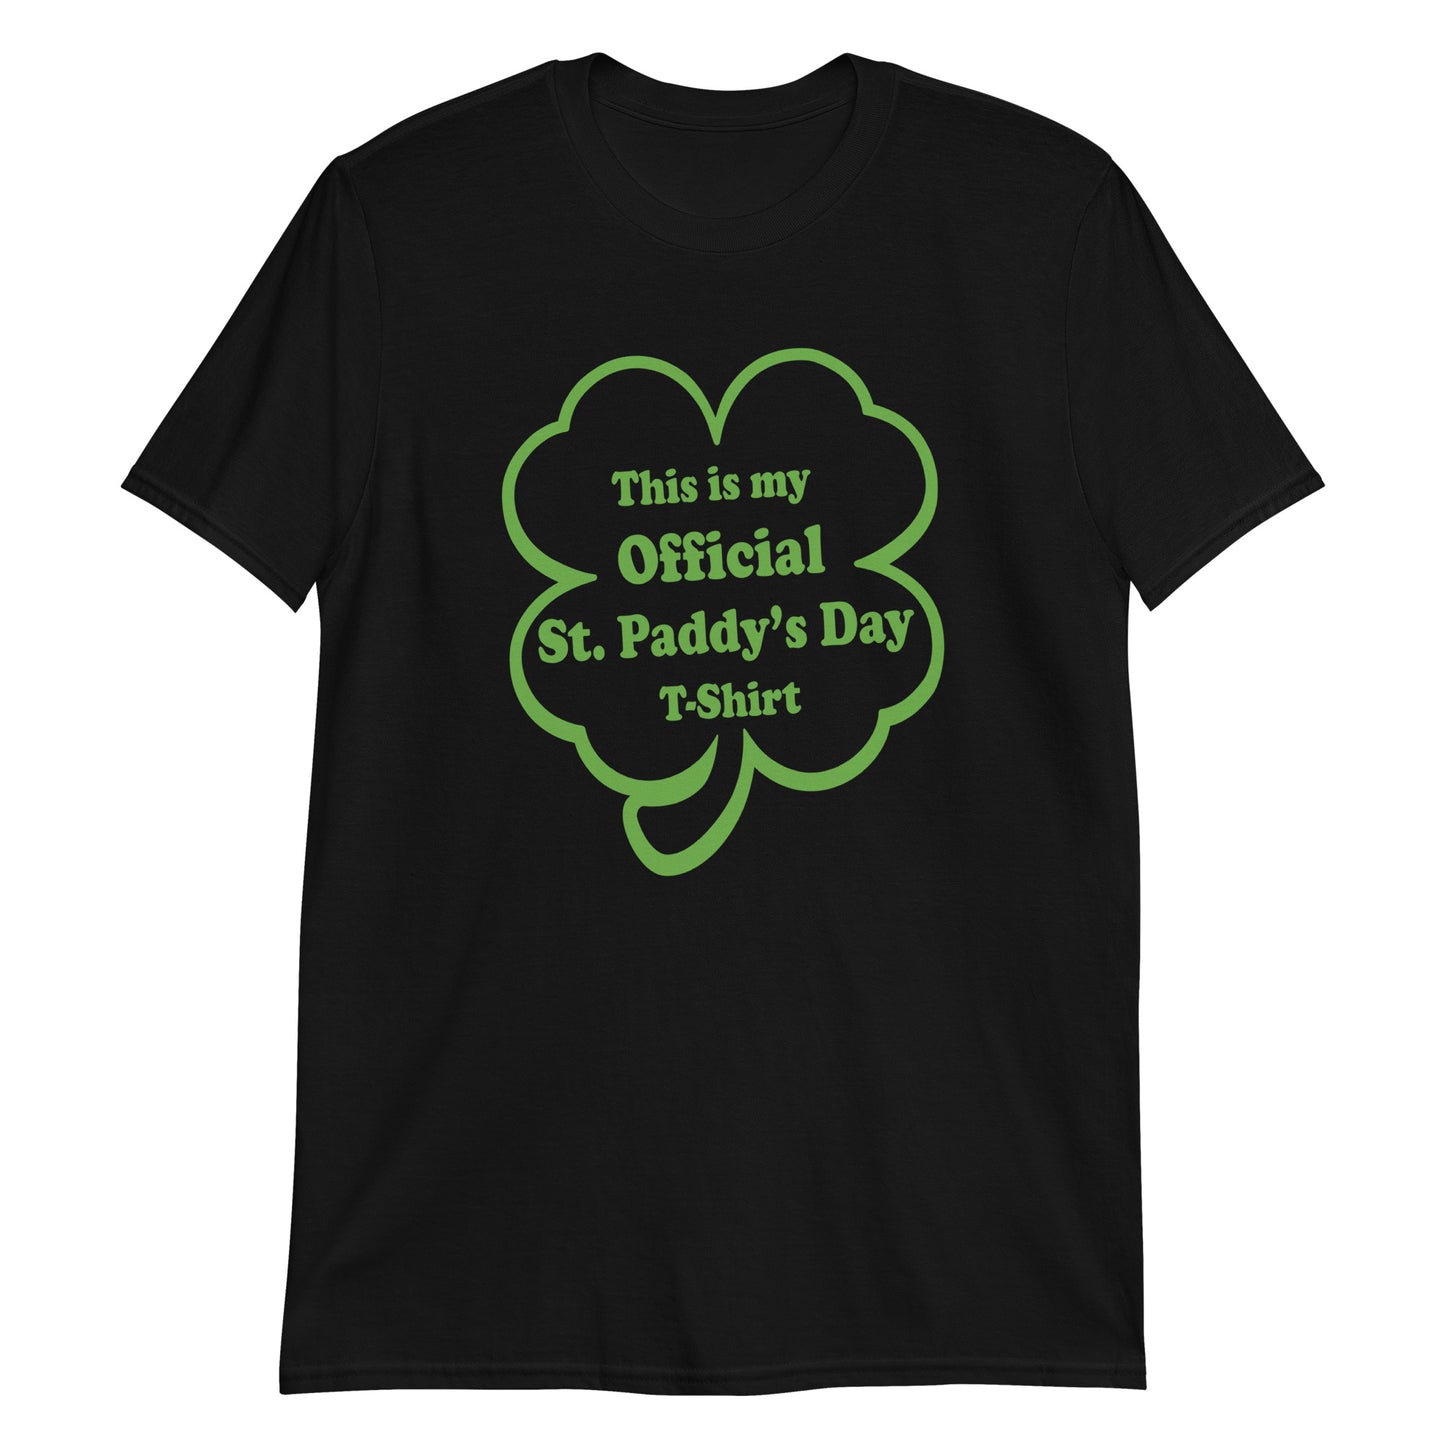 This is my Official St Paddy's Day Shirt graphic t-shirt